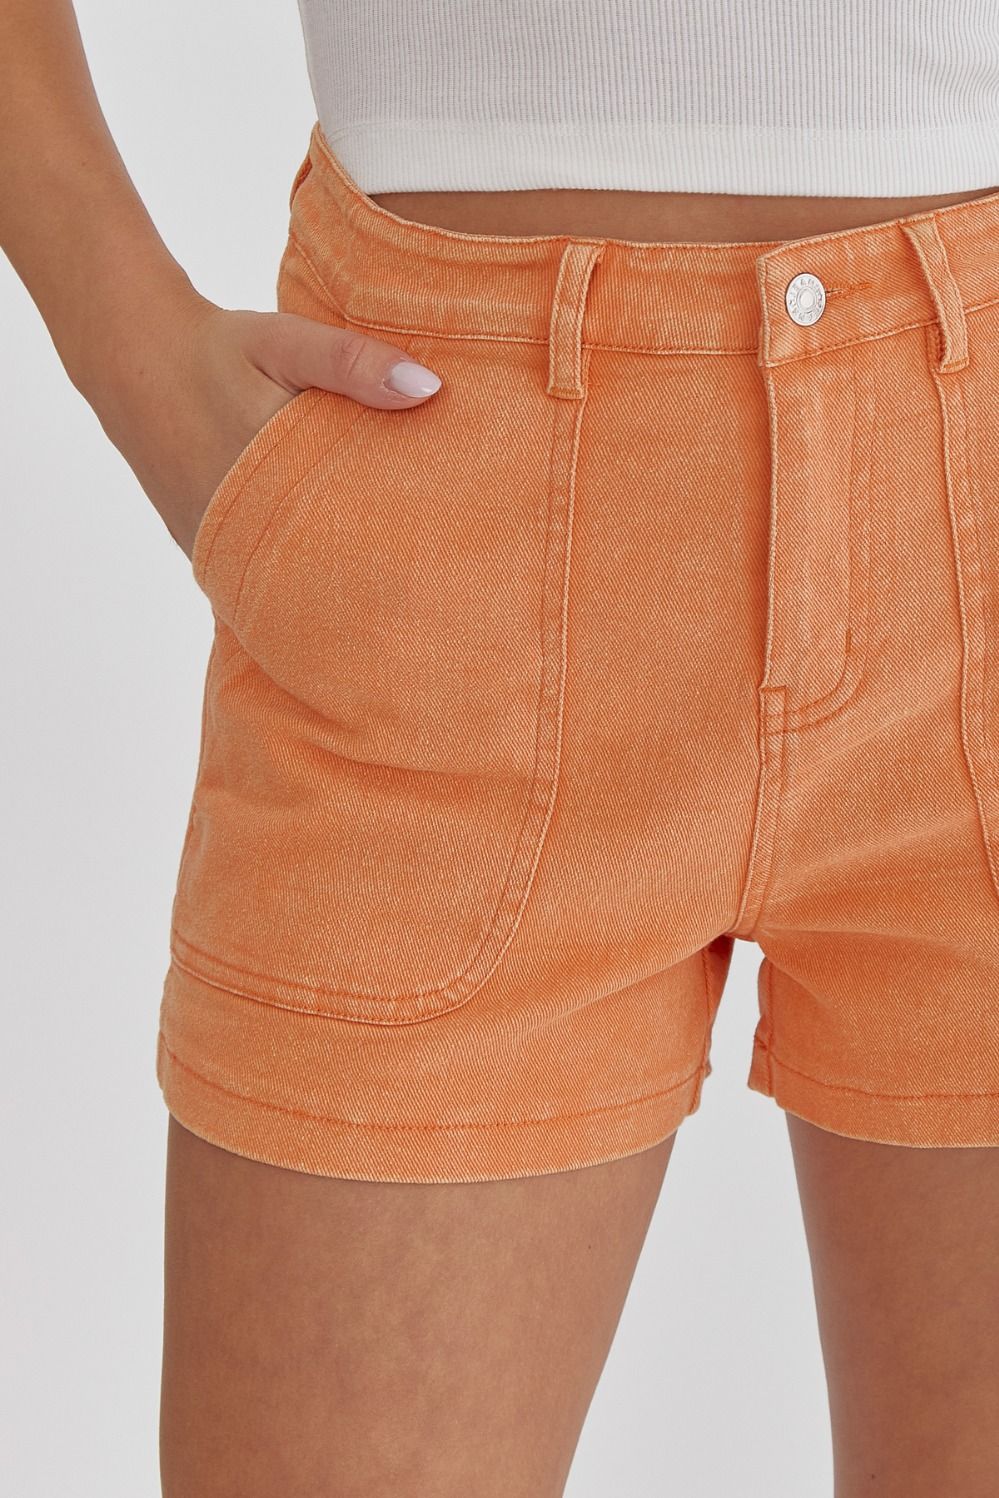 Tennessee Gameday Denim Utility Shorts in orange - front detail view